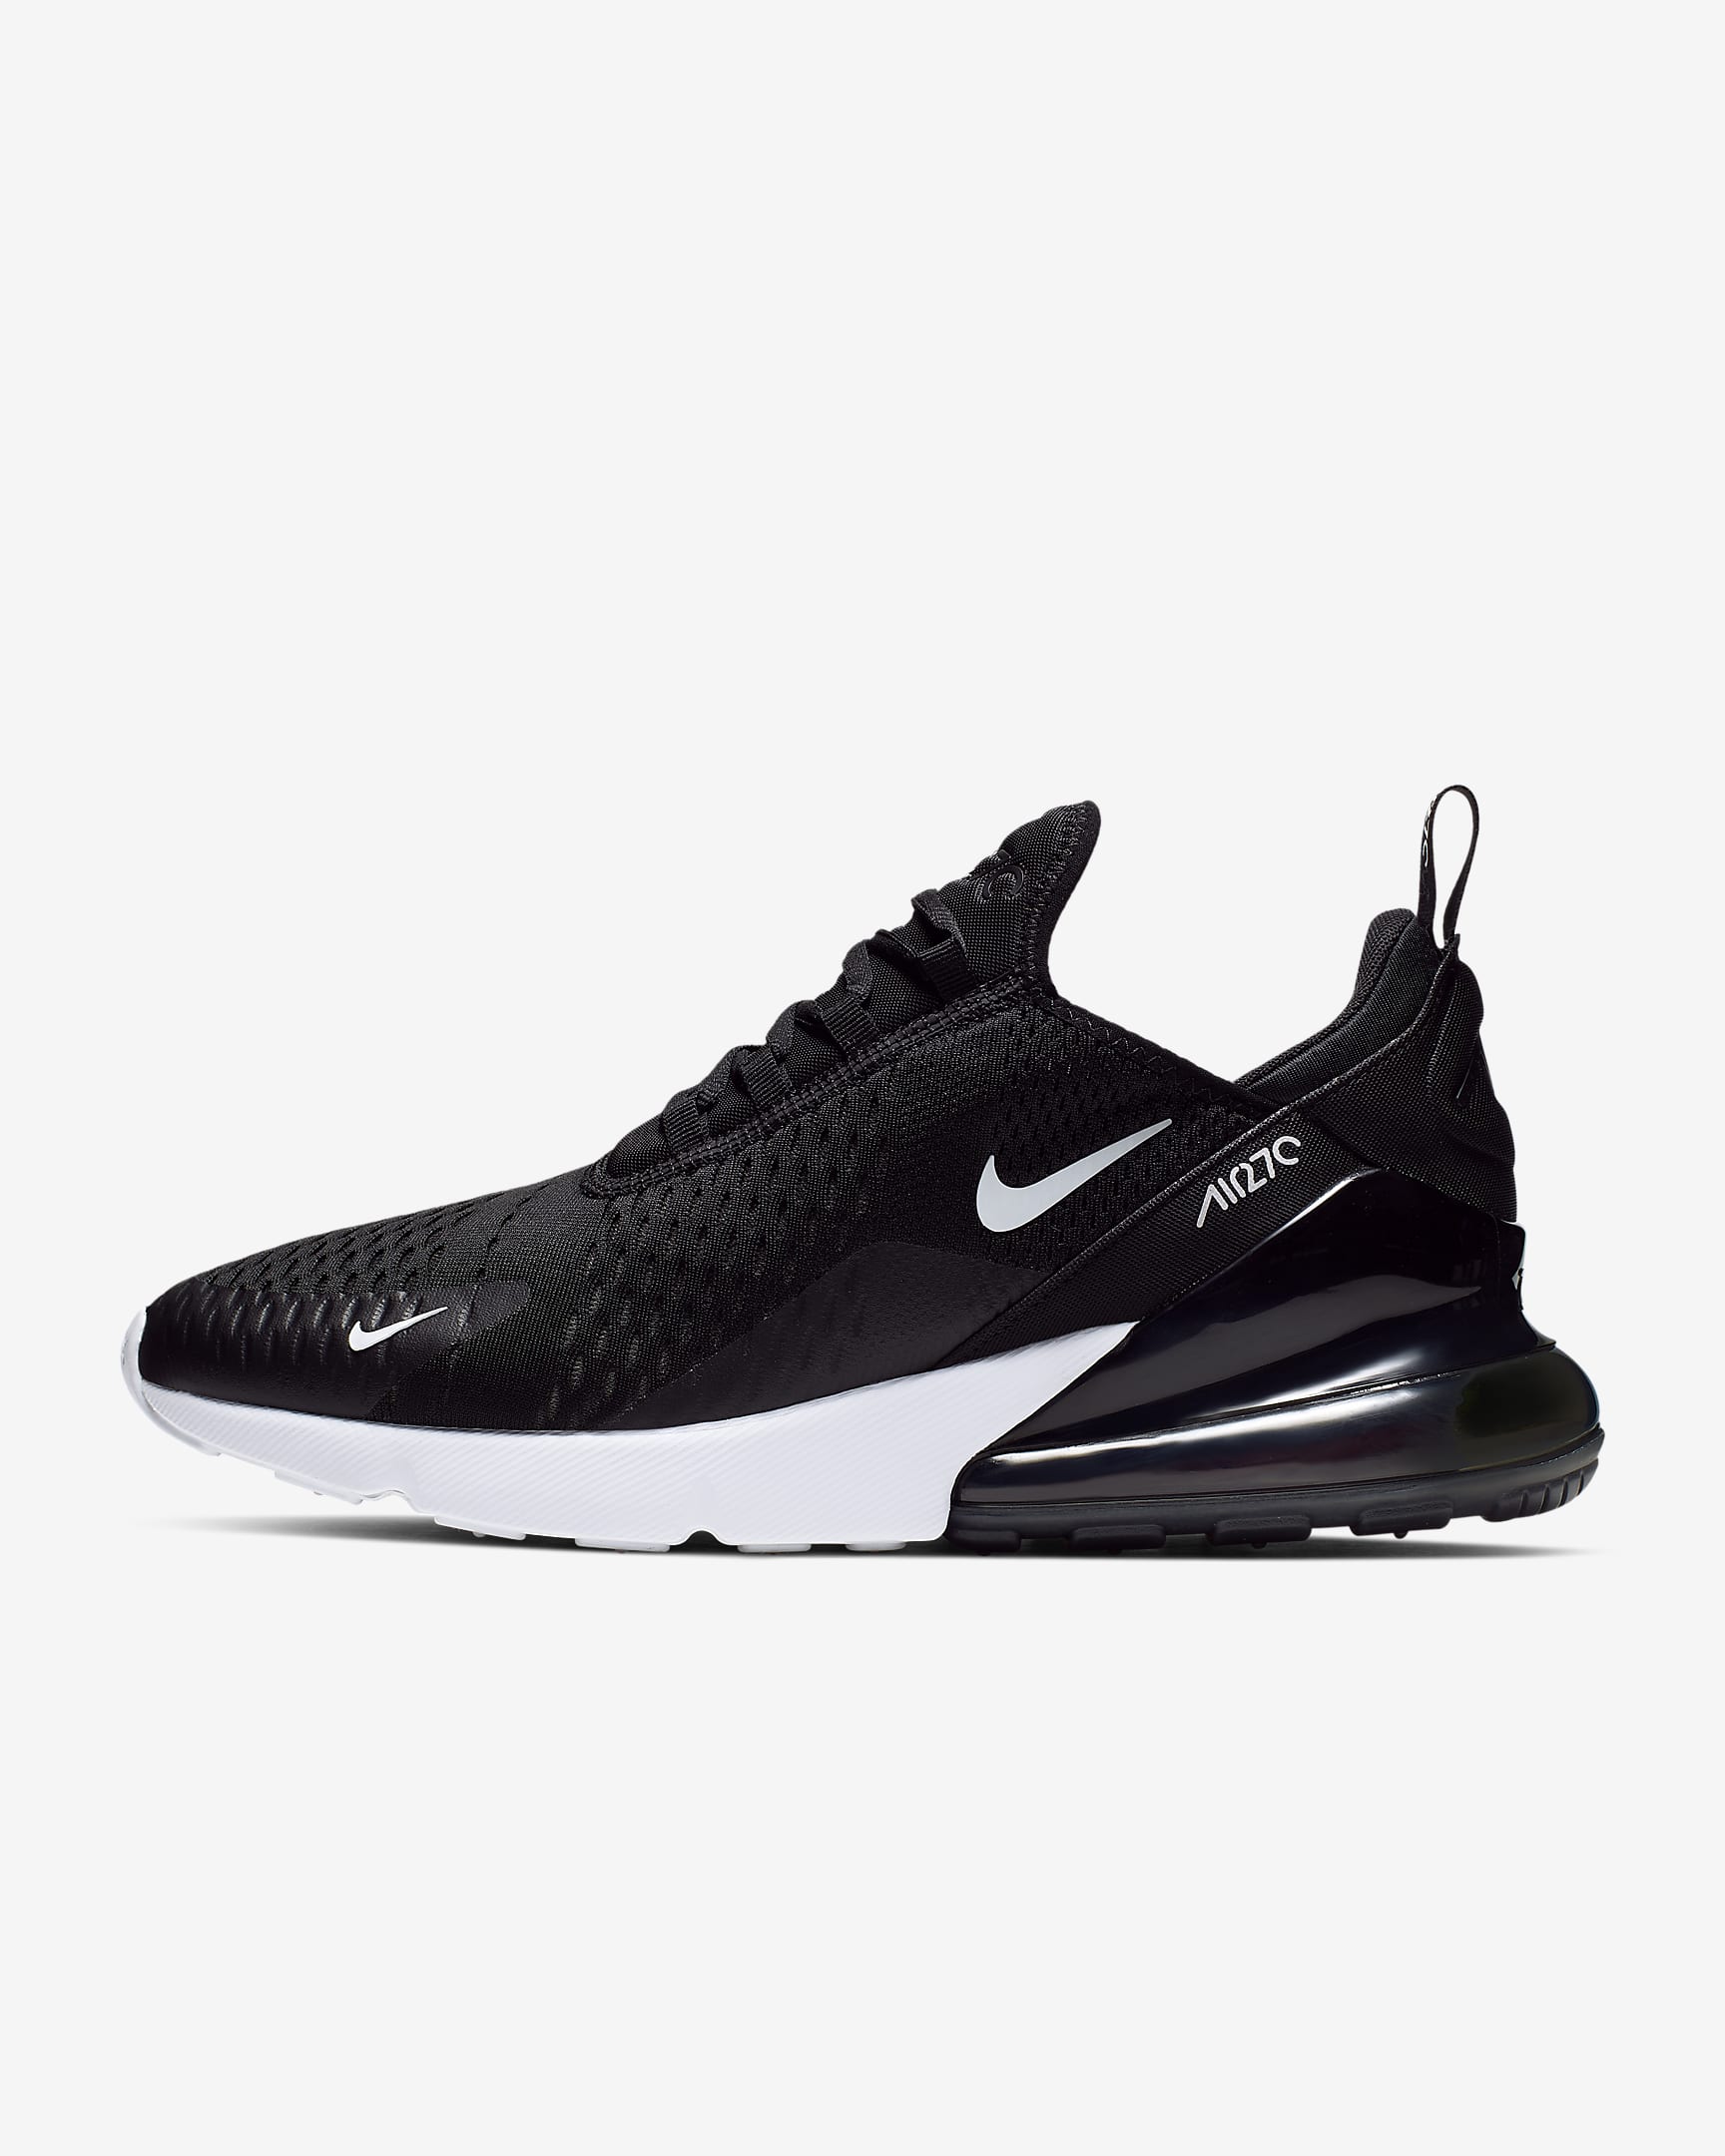 Nike Member Sale: Up to 68% off + an extra 20% off on Select Styles